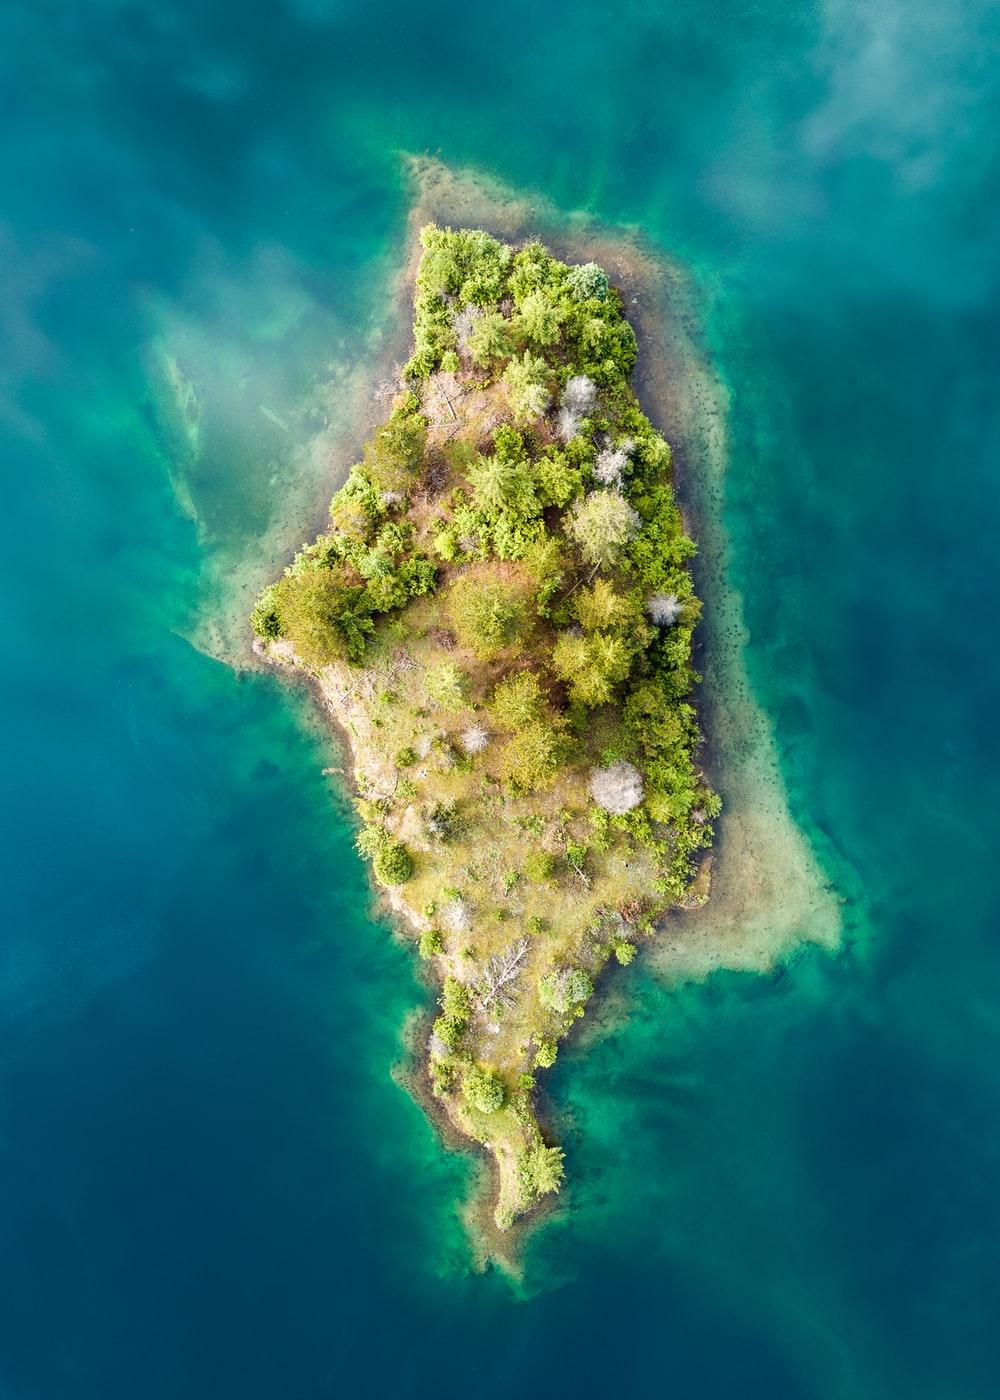 Island Picture. Download Free Image & Stock